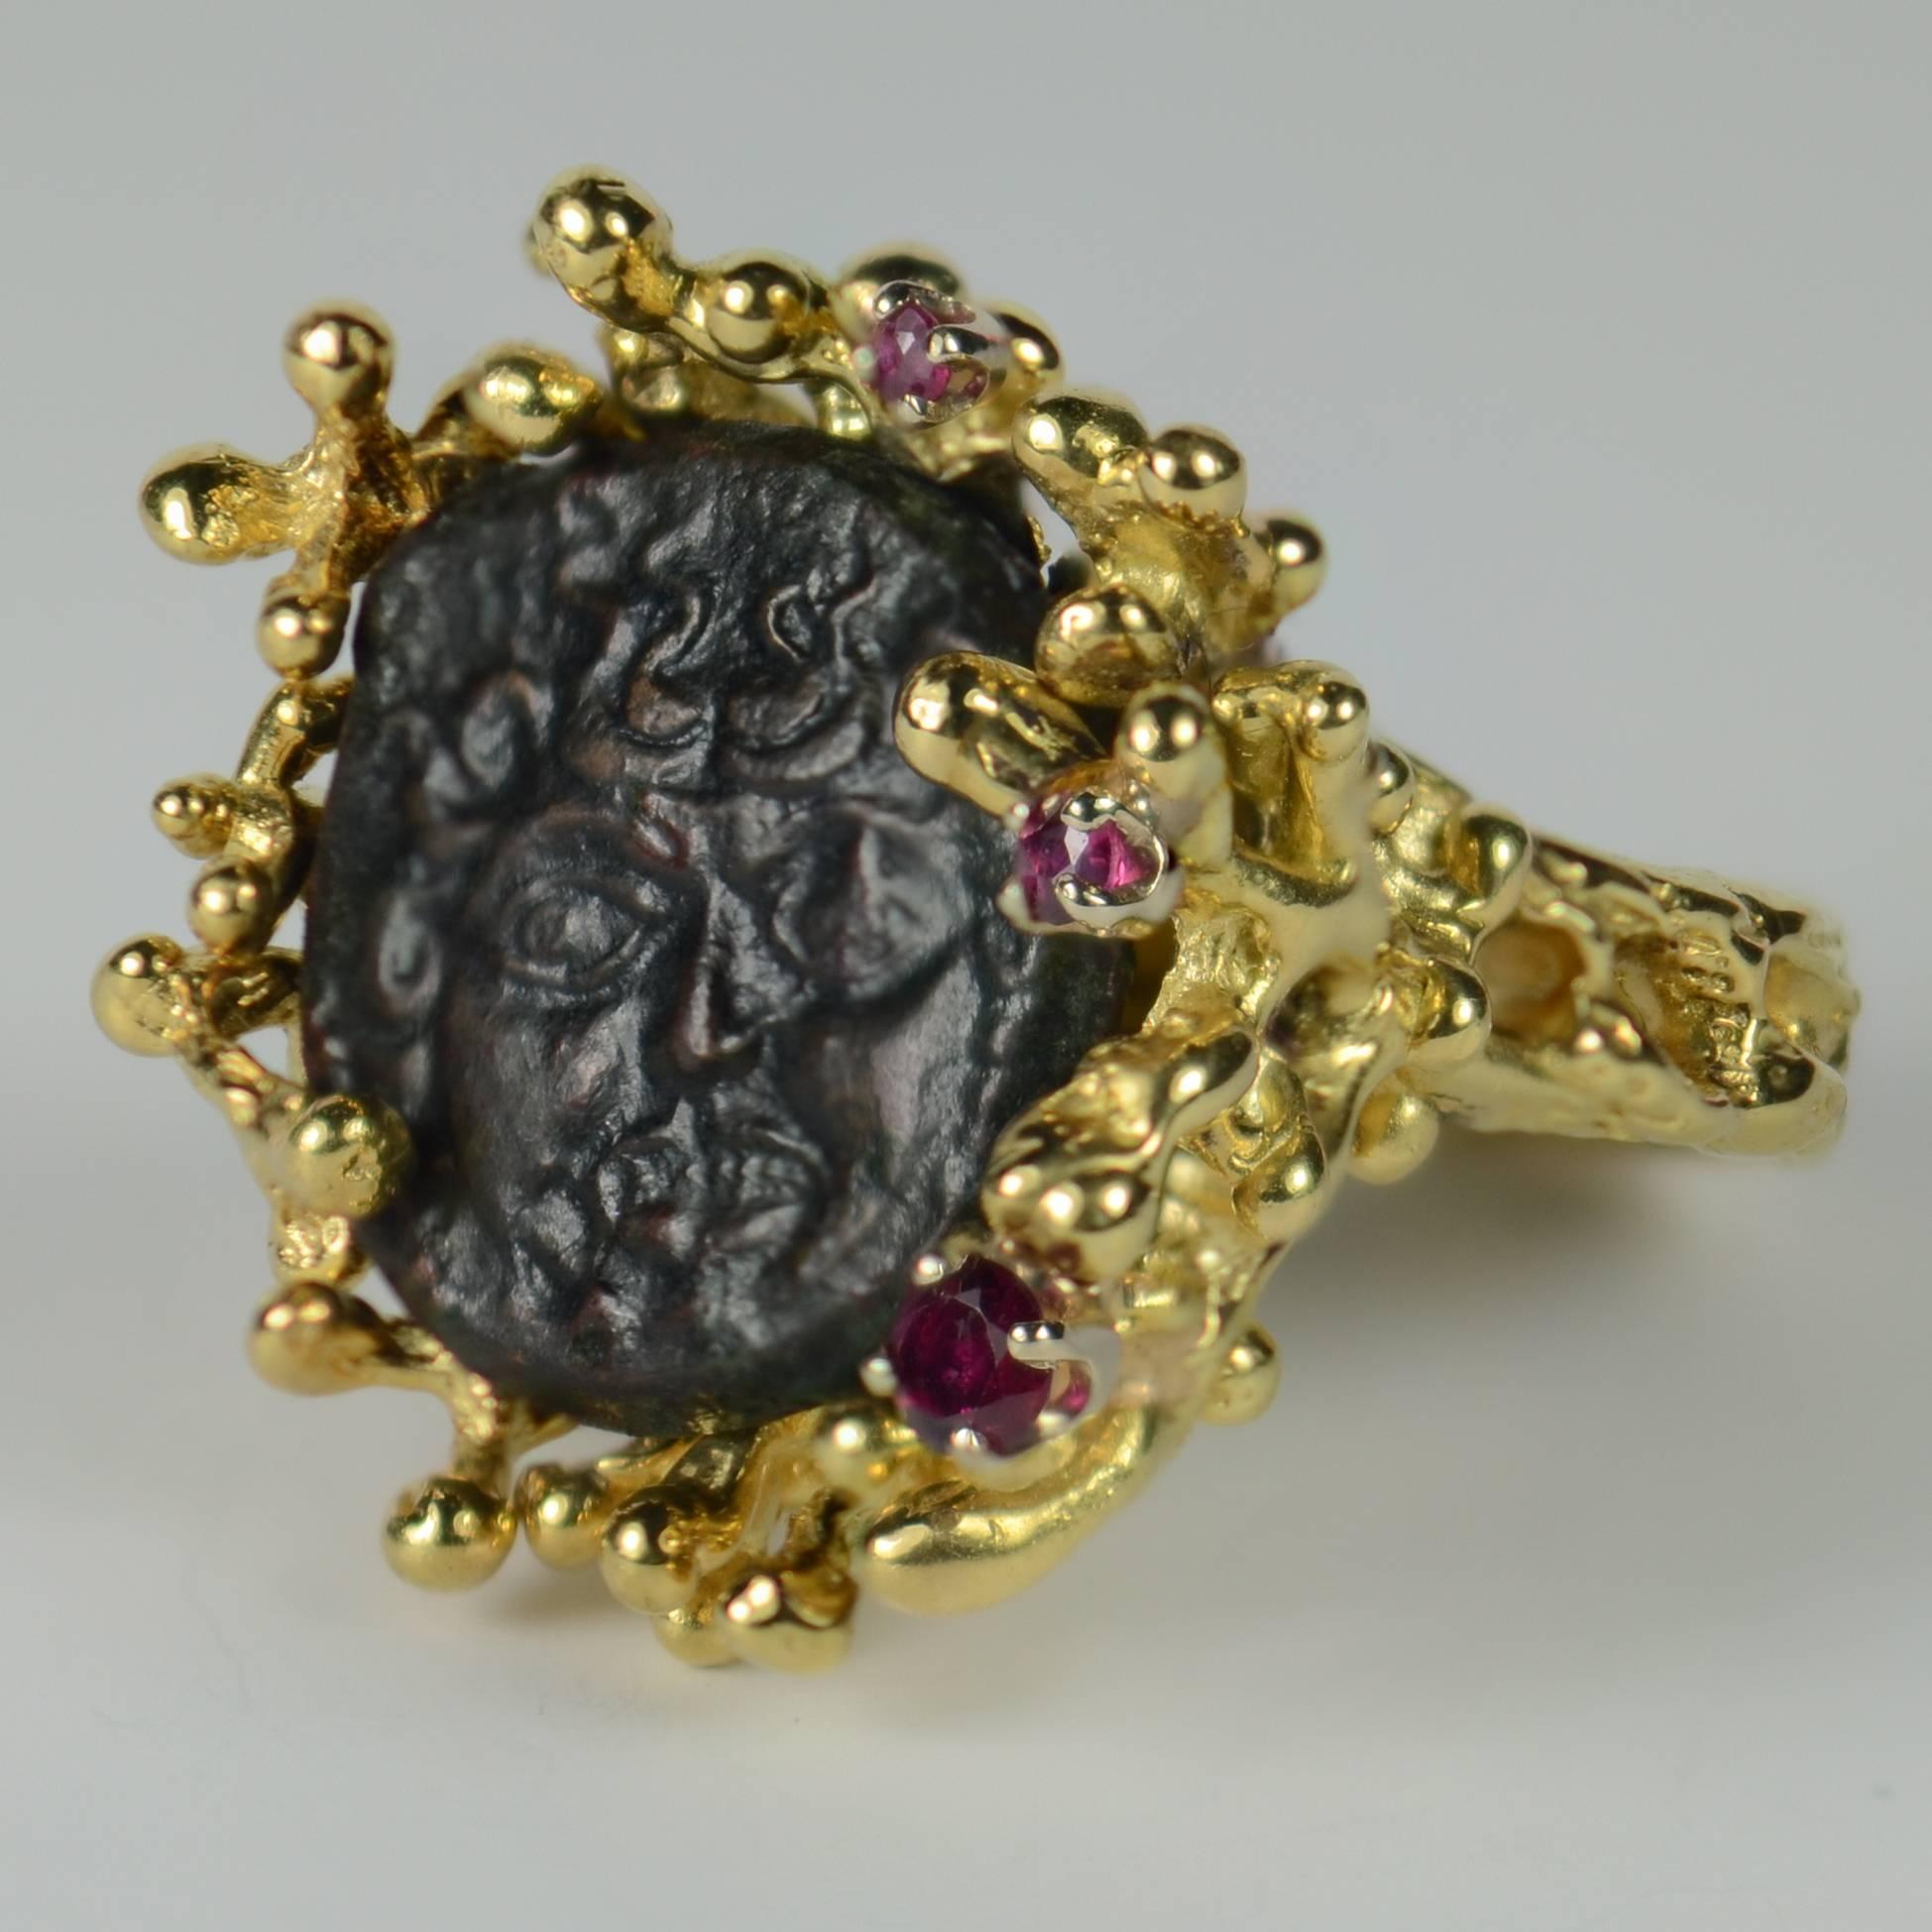 The central point of this unusual ring is an ancient bronze coin with a Medusa face detail.  It is mounted in an organic 18 carat yellow gold mount with 3 asymmetrically positioned natural rubies.  This ring was made circa 1970-1980.

The Medusa